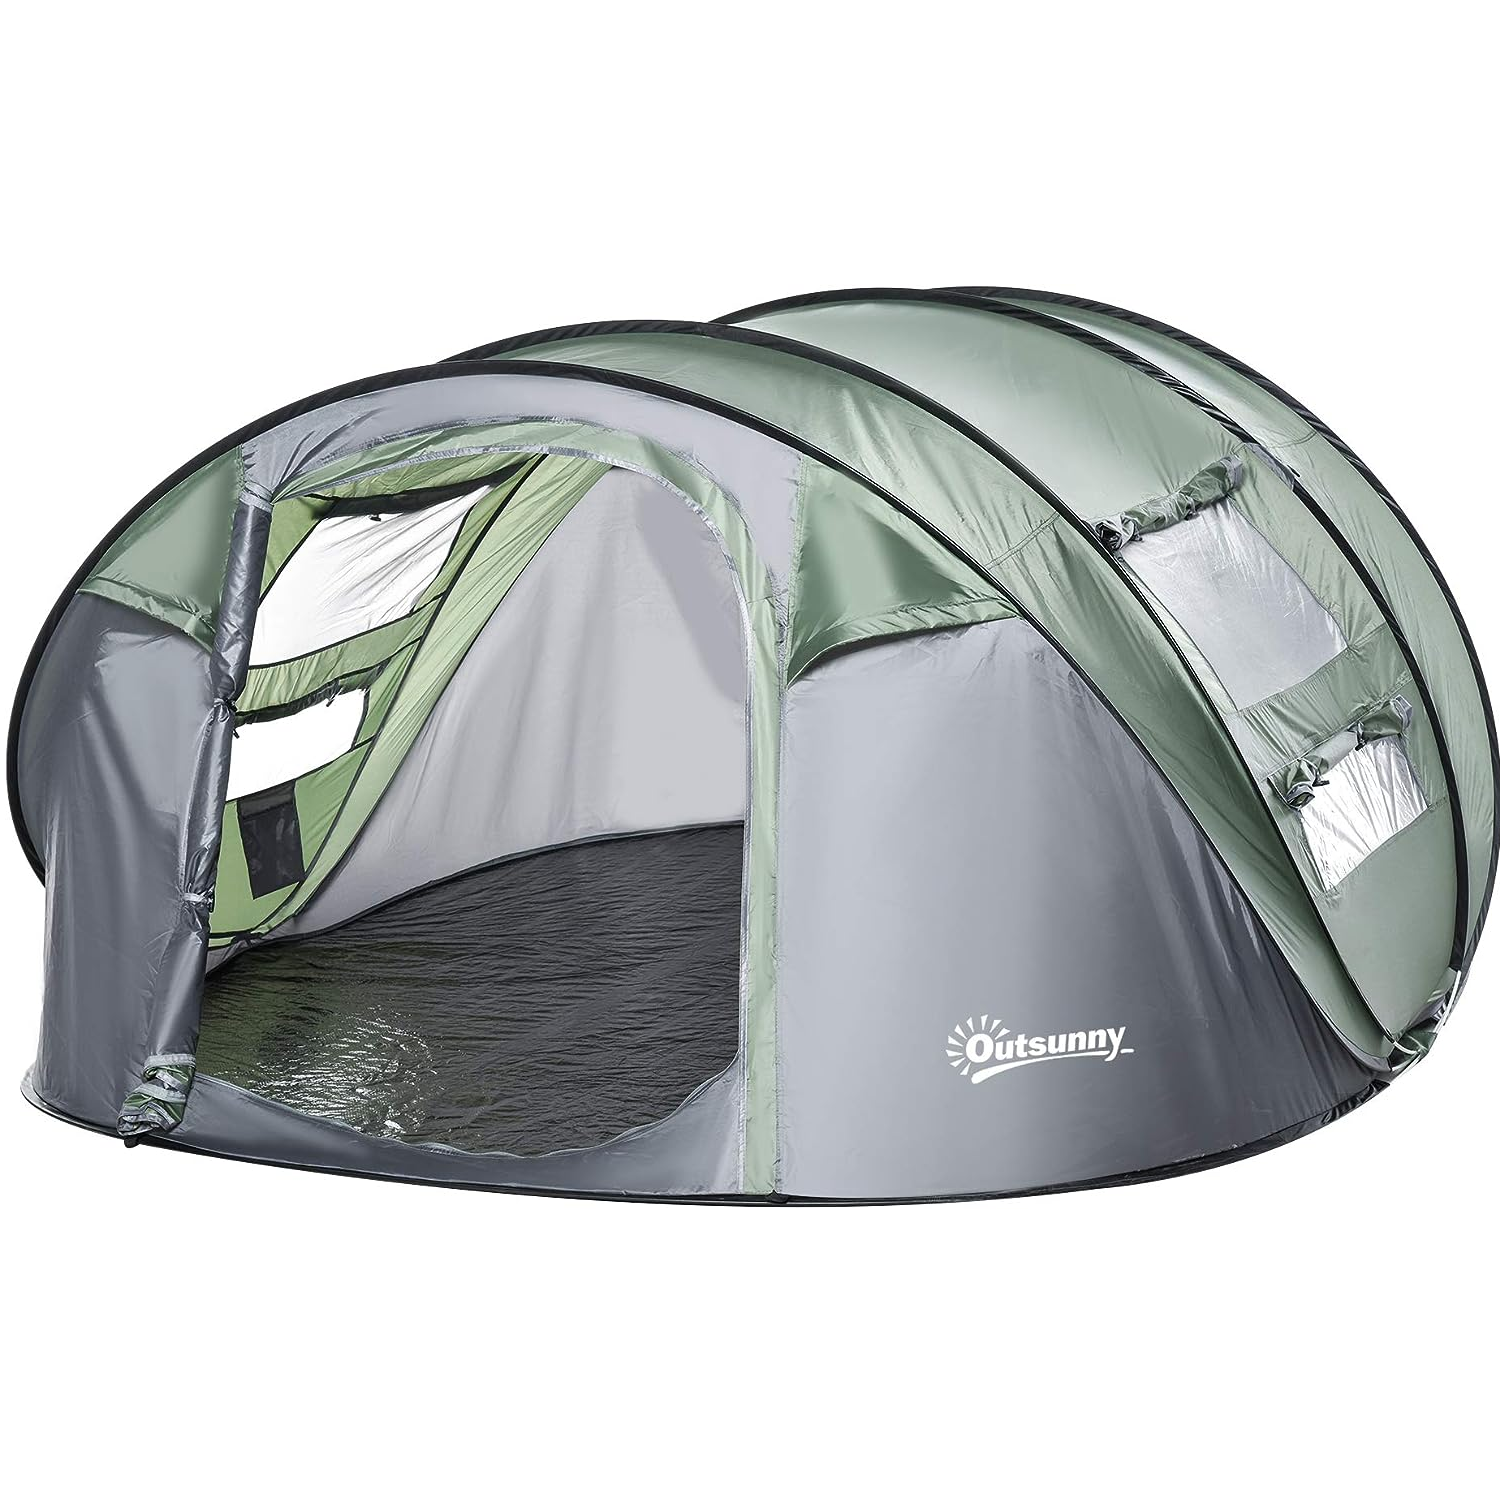 OutSunny 4-5 Person Pop Up Camping Tent Green/Grey